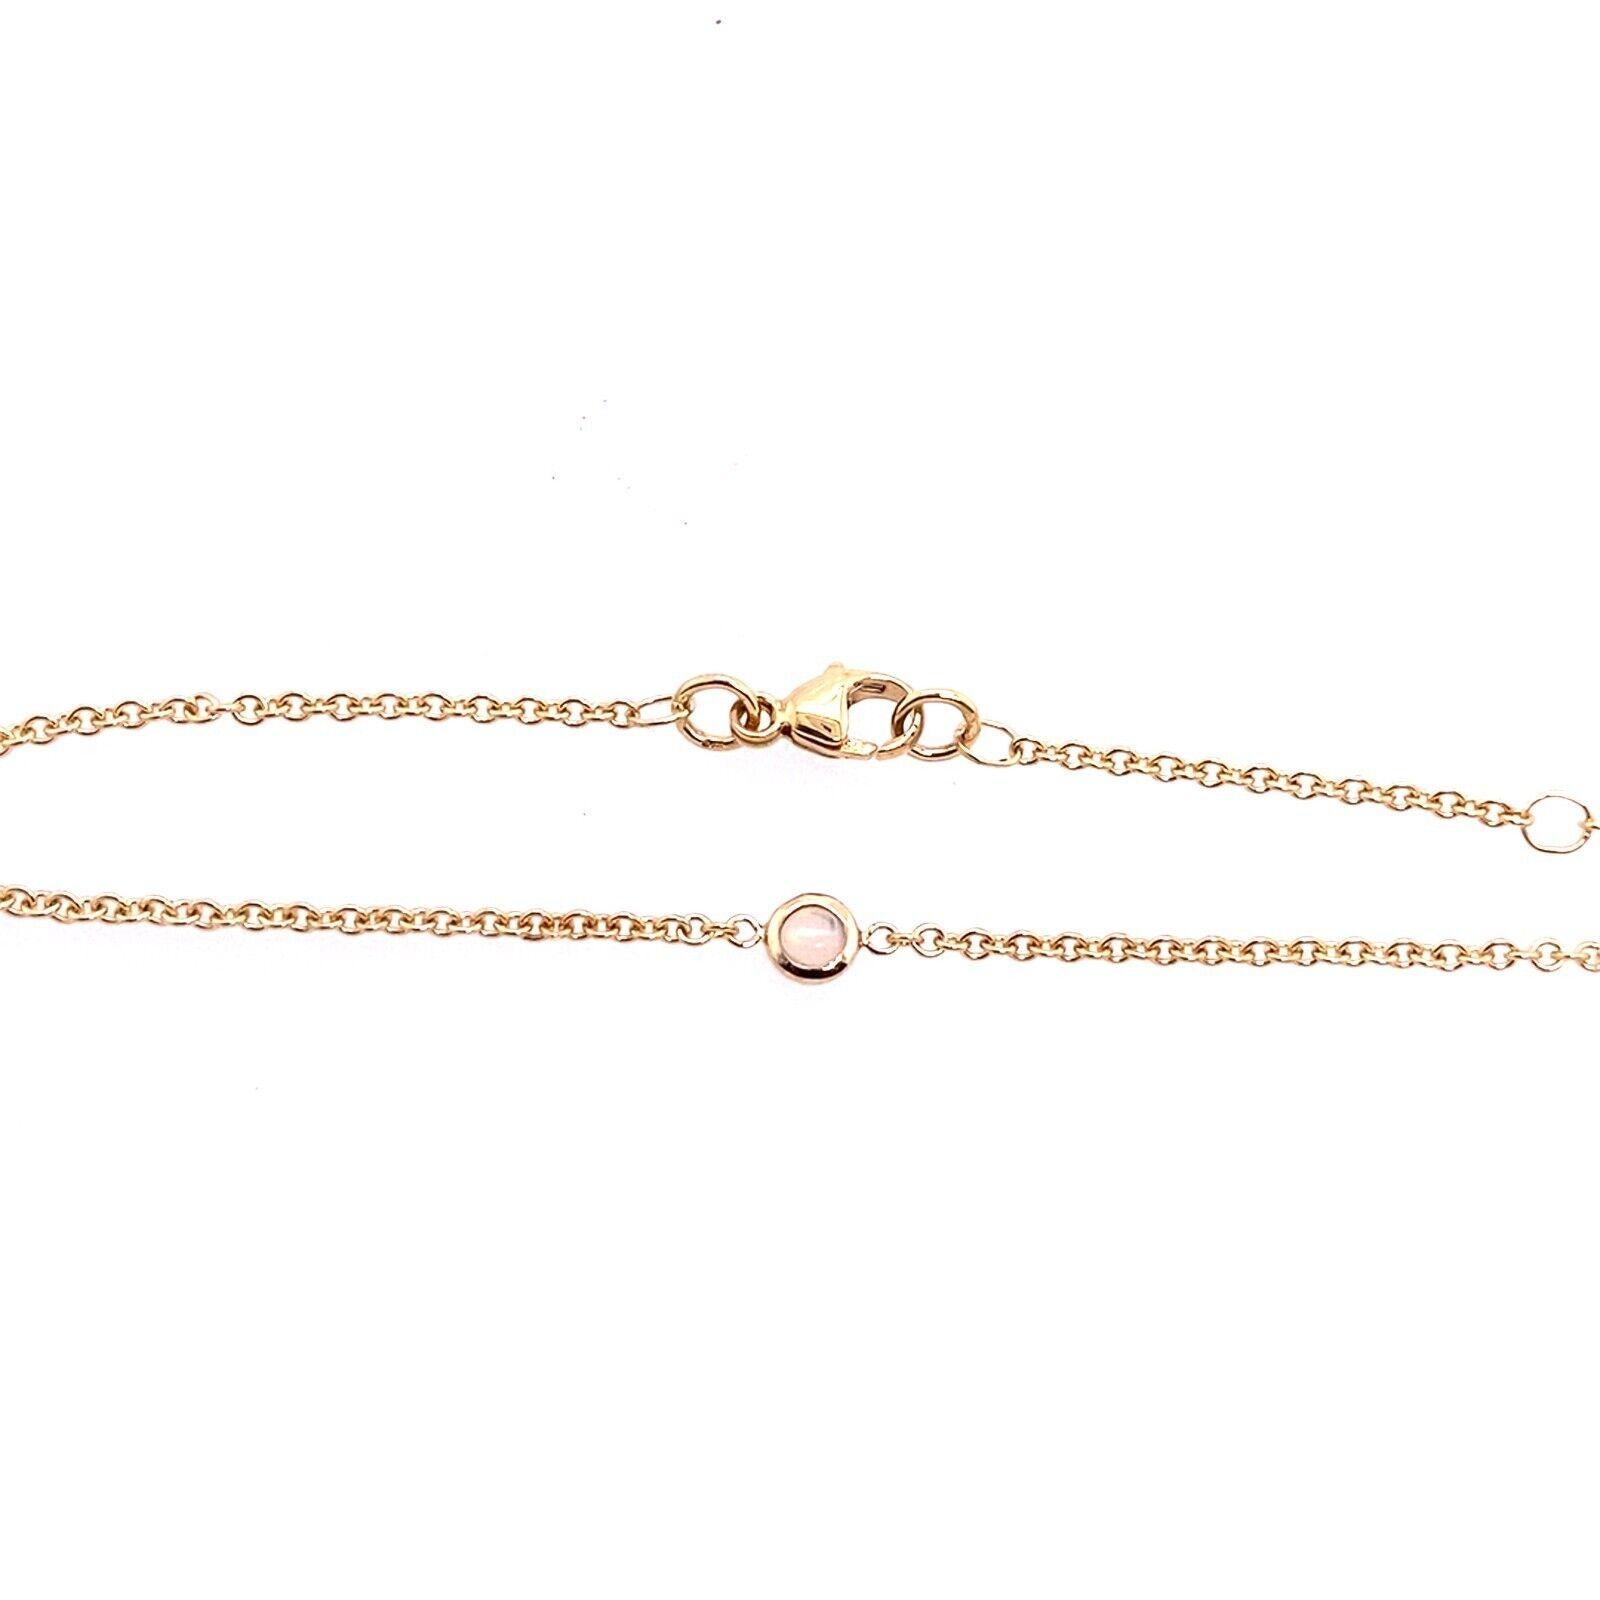 This October birthstone bracelet set, crafted in 9ct yellow gold is the perfect gift to celebrate one’s birth month. The bracelet comes with 1 round cut opal, which is the birthstone for October, and a lobster clasp for easy wear.

Additional